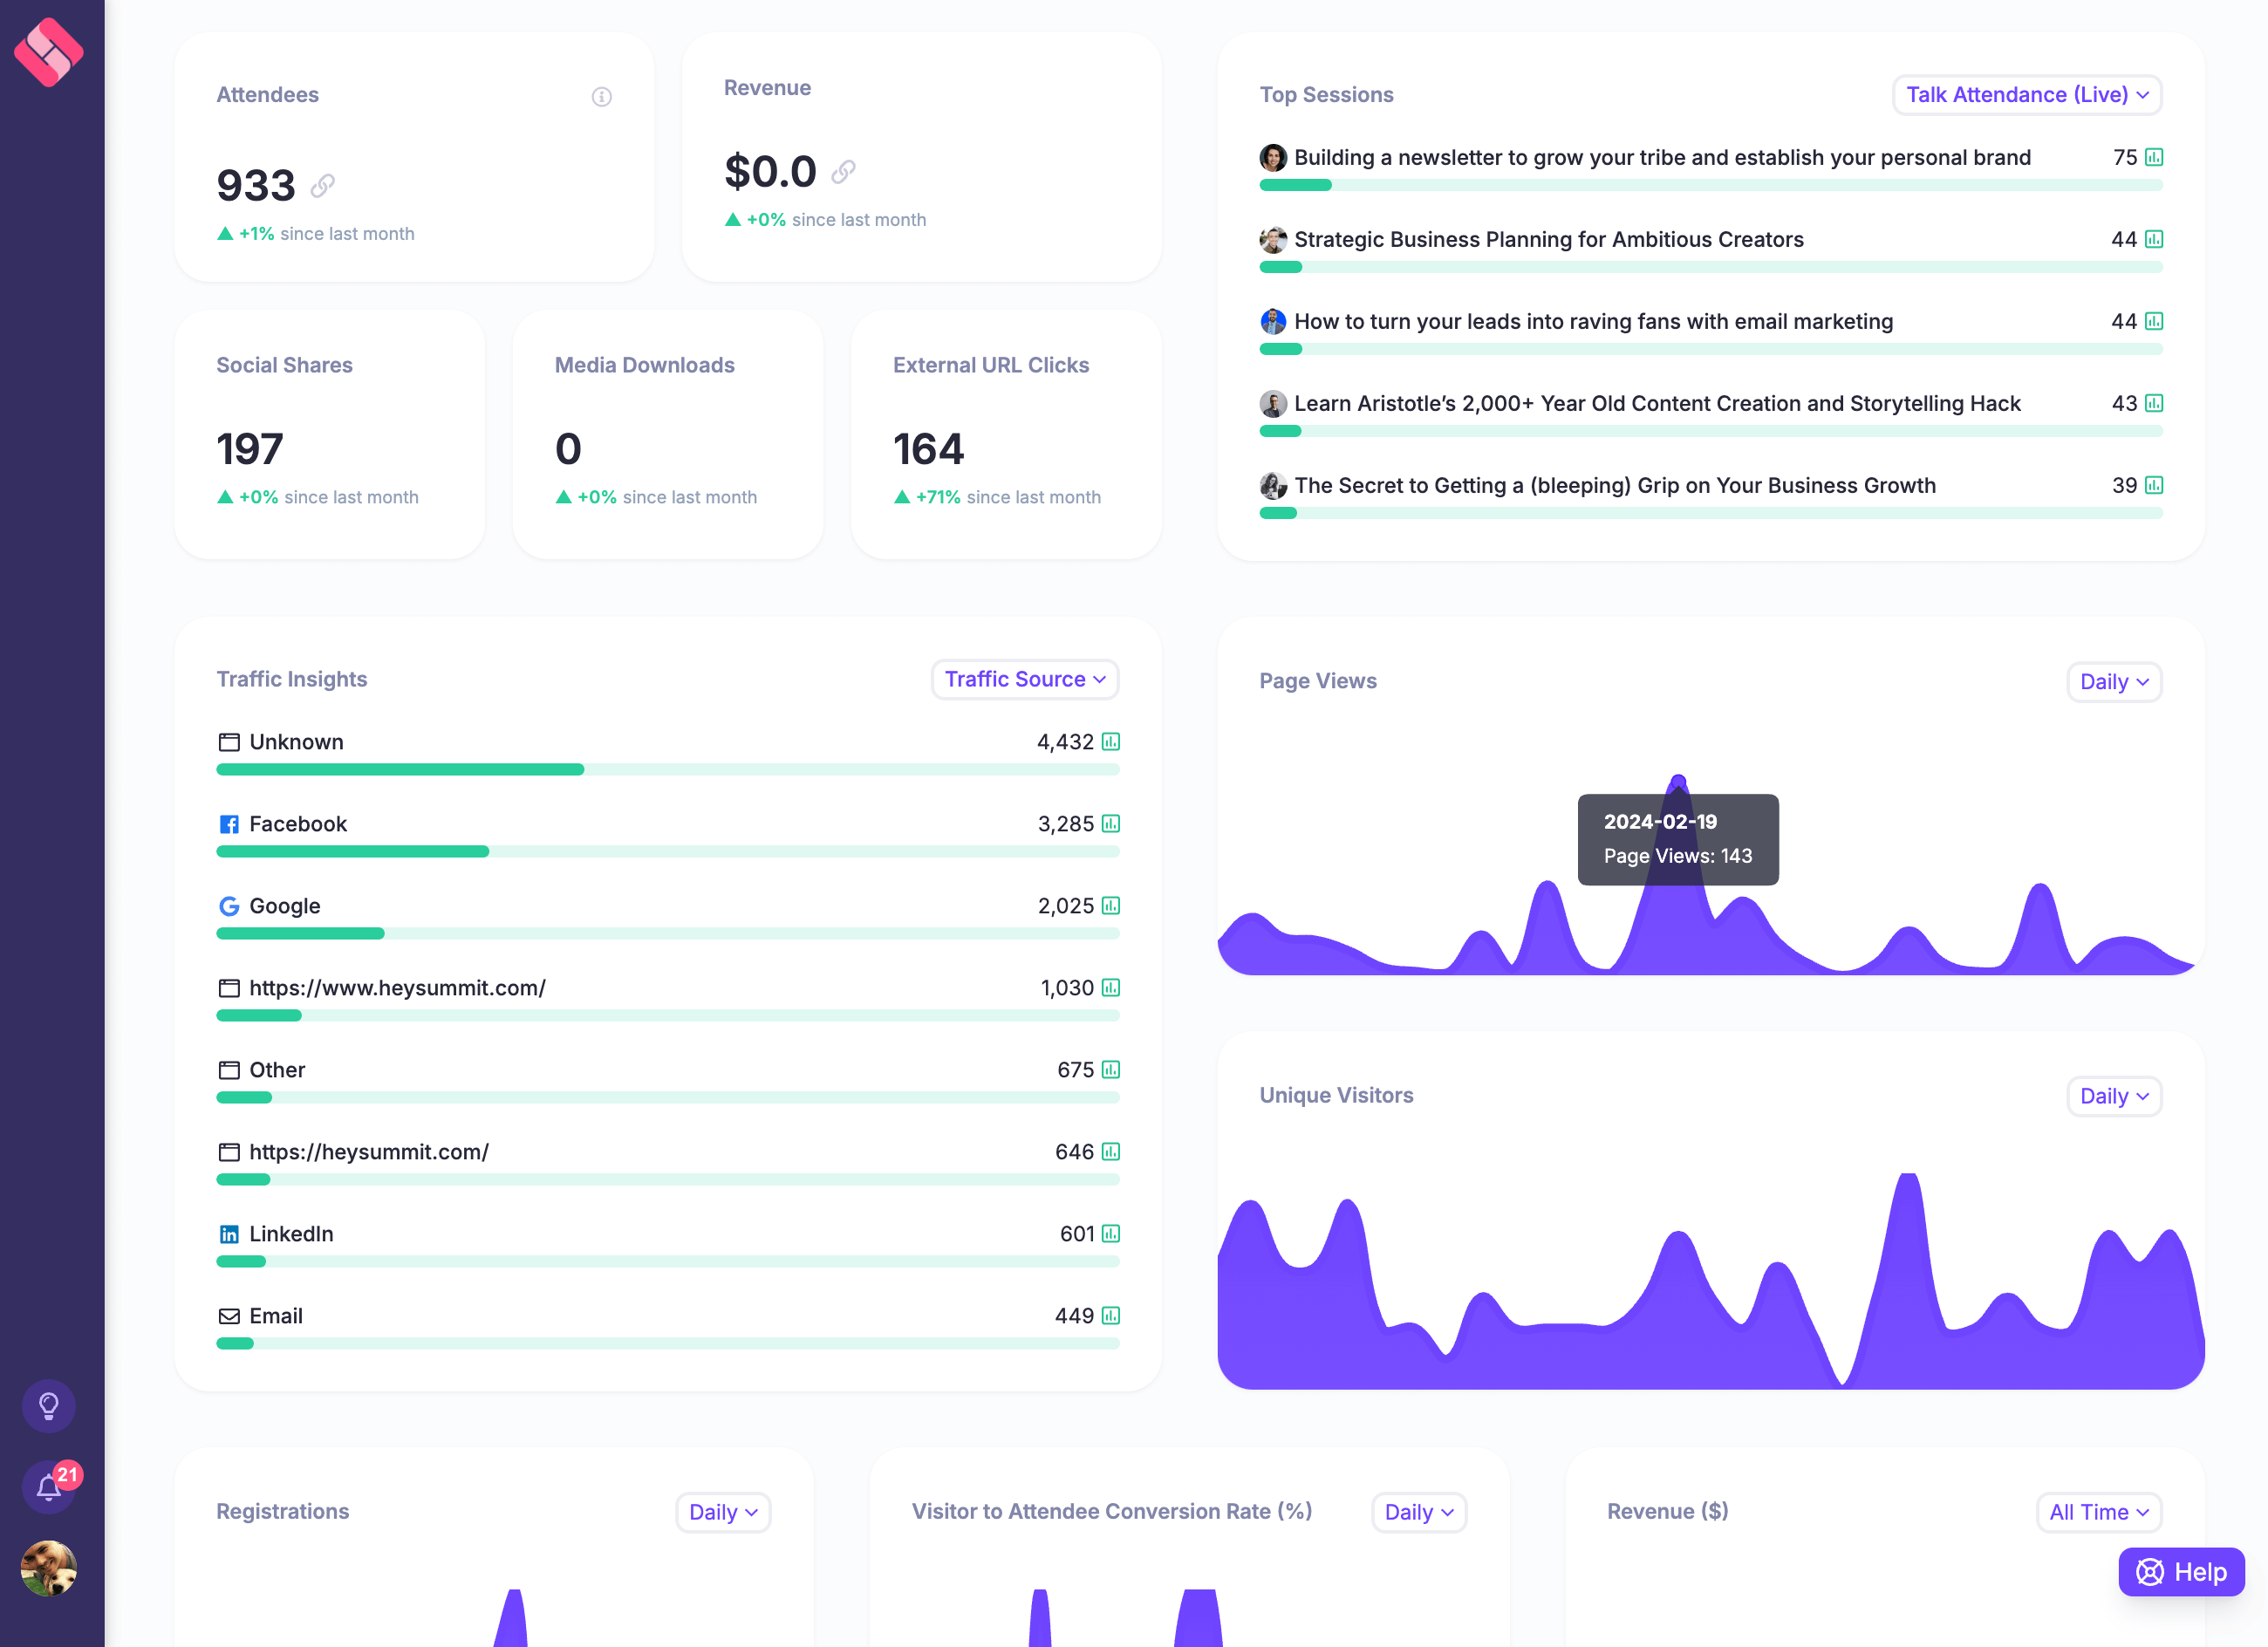 Our event dashboard gives you a quick overview of how your event is performing - from page views and conversion rates, to attendee numbers and revenue.